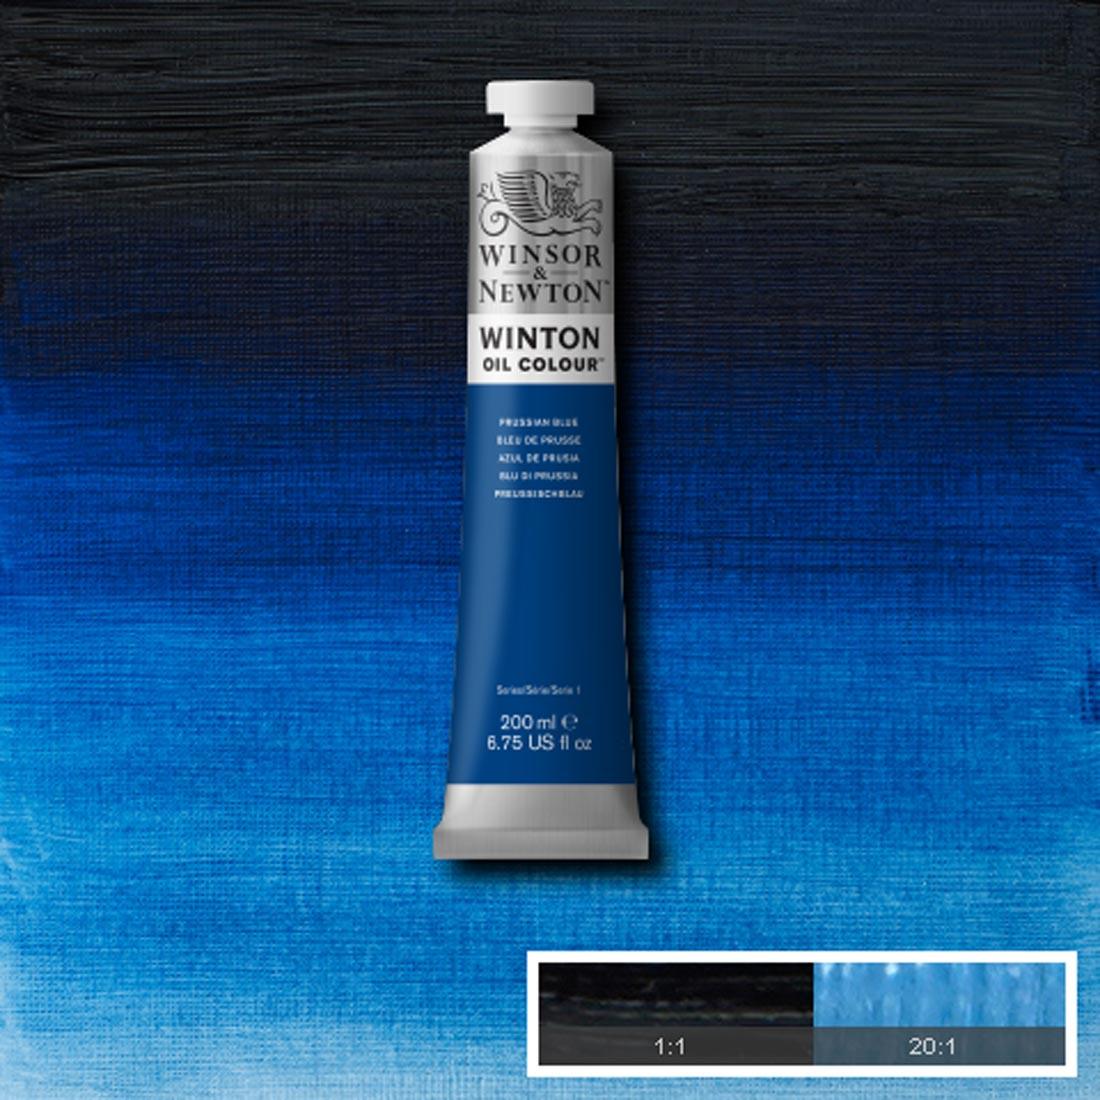 Tube of Prussian Blue Winsor & Newton Winton Oil Colour with a paint swatch for the background